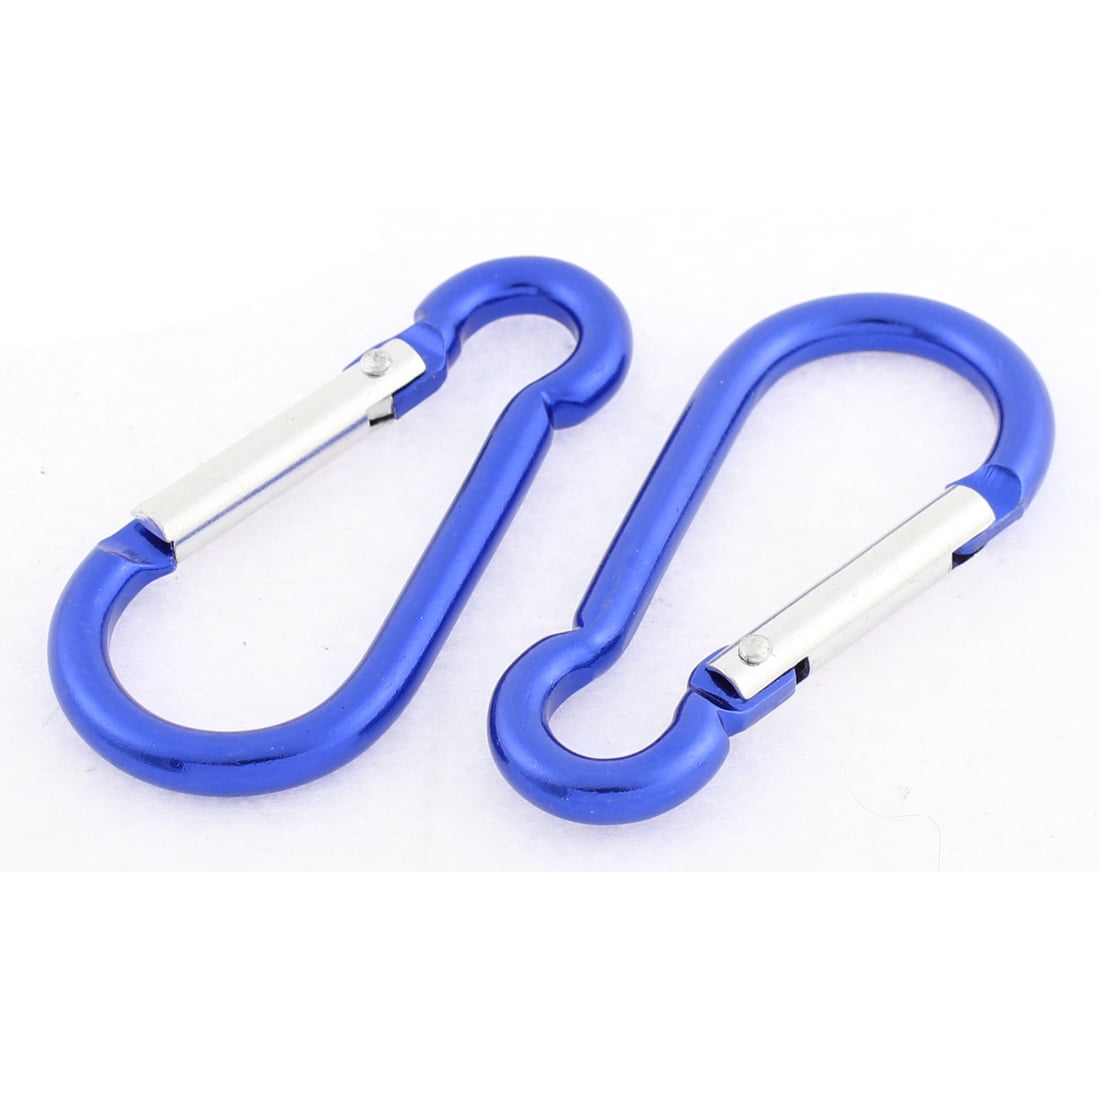 Carabiner Camp Spring Snap Clip Hook Keychain Climbing Rope Work BLUE 